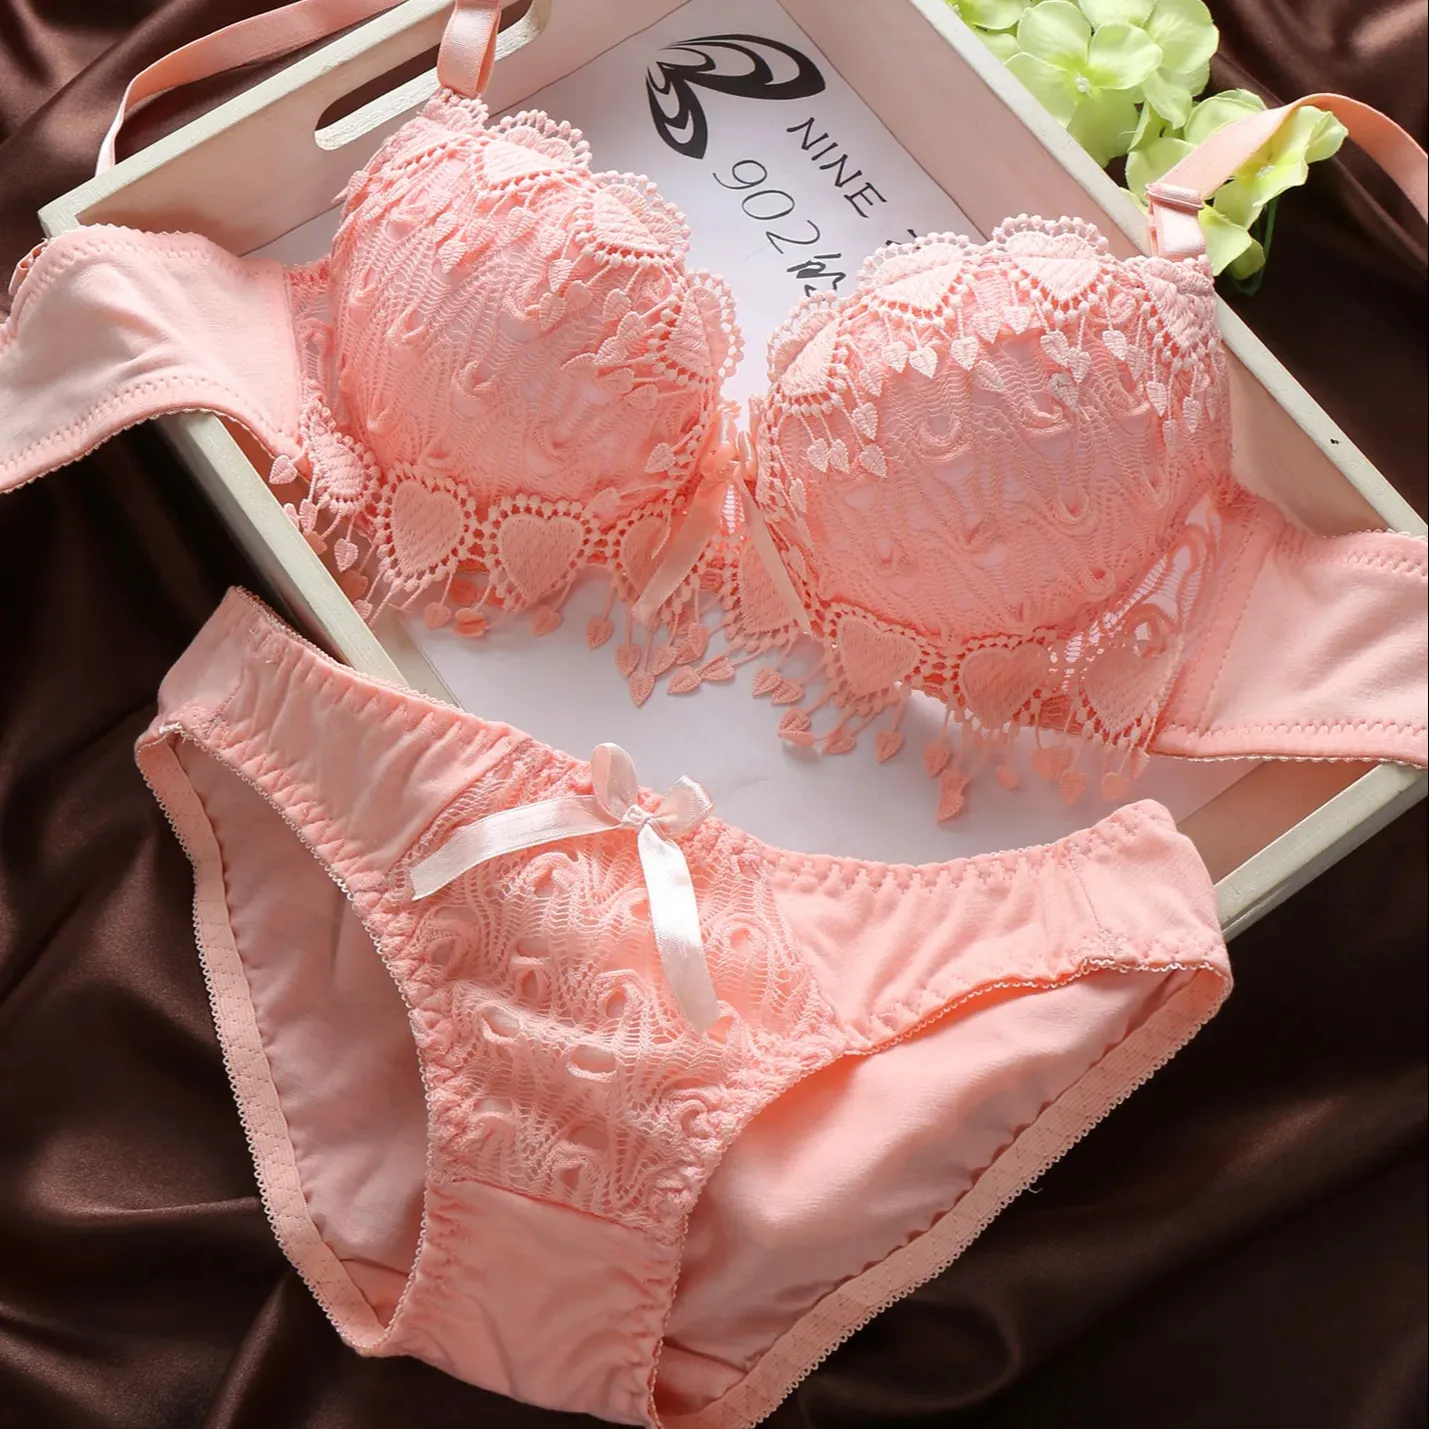 32 to 38 B Cup Lace Bra panties Sets Lovely Girls Cute Push Up Lace Underwire Embroidered Bra and brief Sets for Women